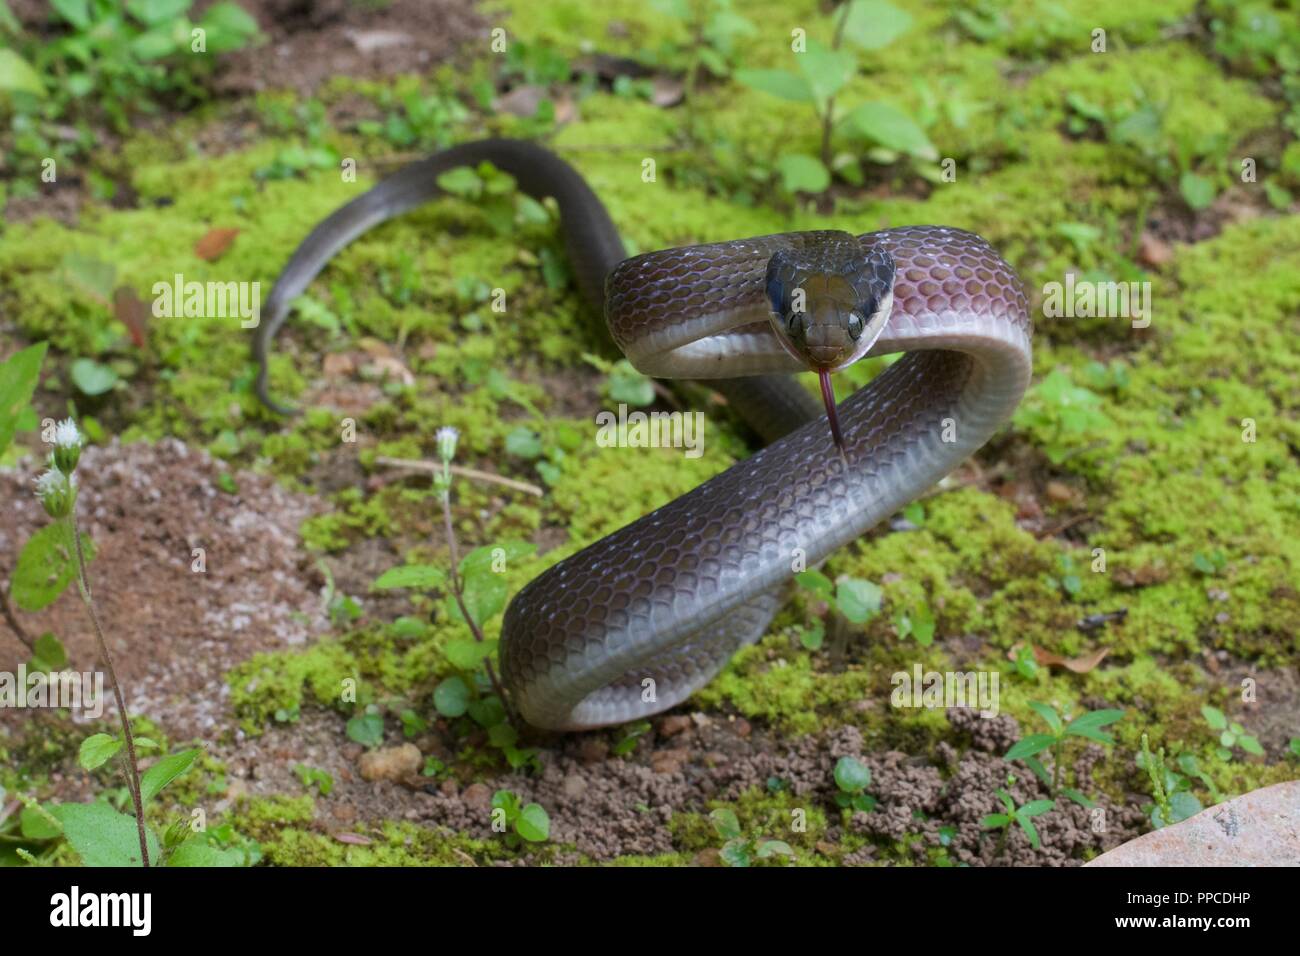 A White-lipped Herald Snake (Crotaphopeltis hotamboeia) in a defensive posture on mossy ground in Bobiri Forest Reserve, Ghana, West Africa Stock Photo